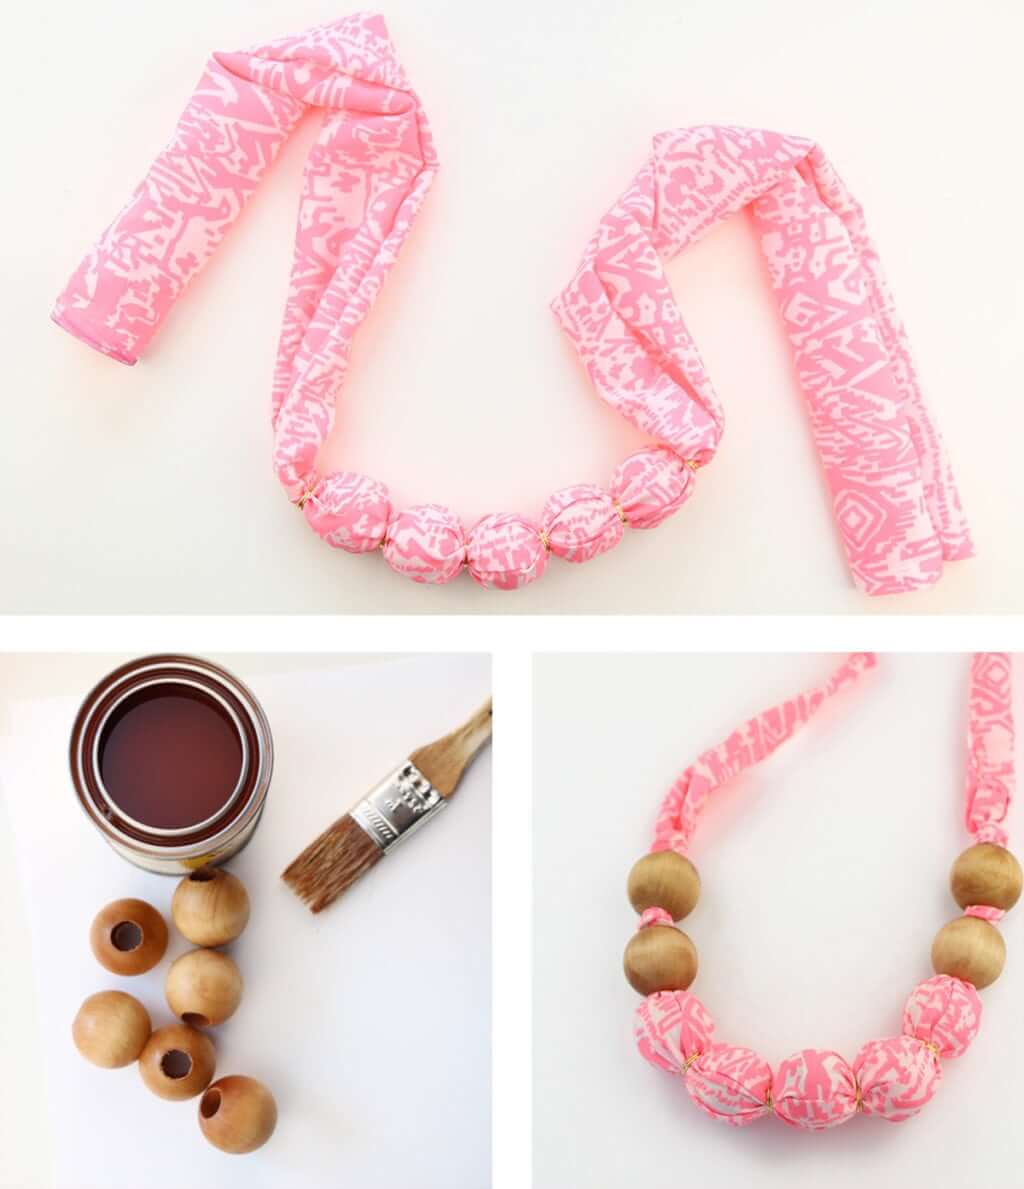 How To Make Necklace Using Fabrics & Wood Beads